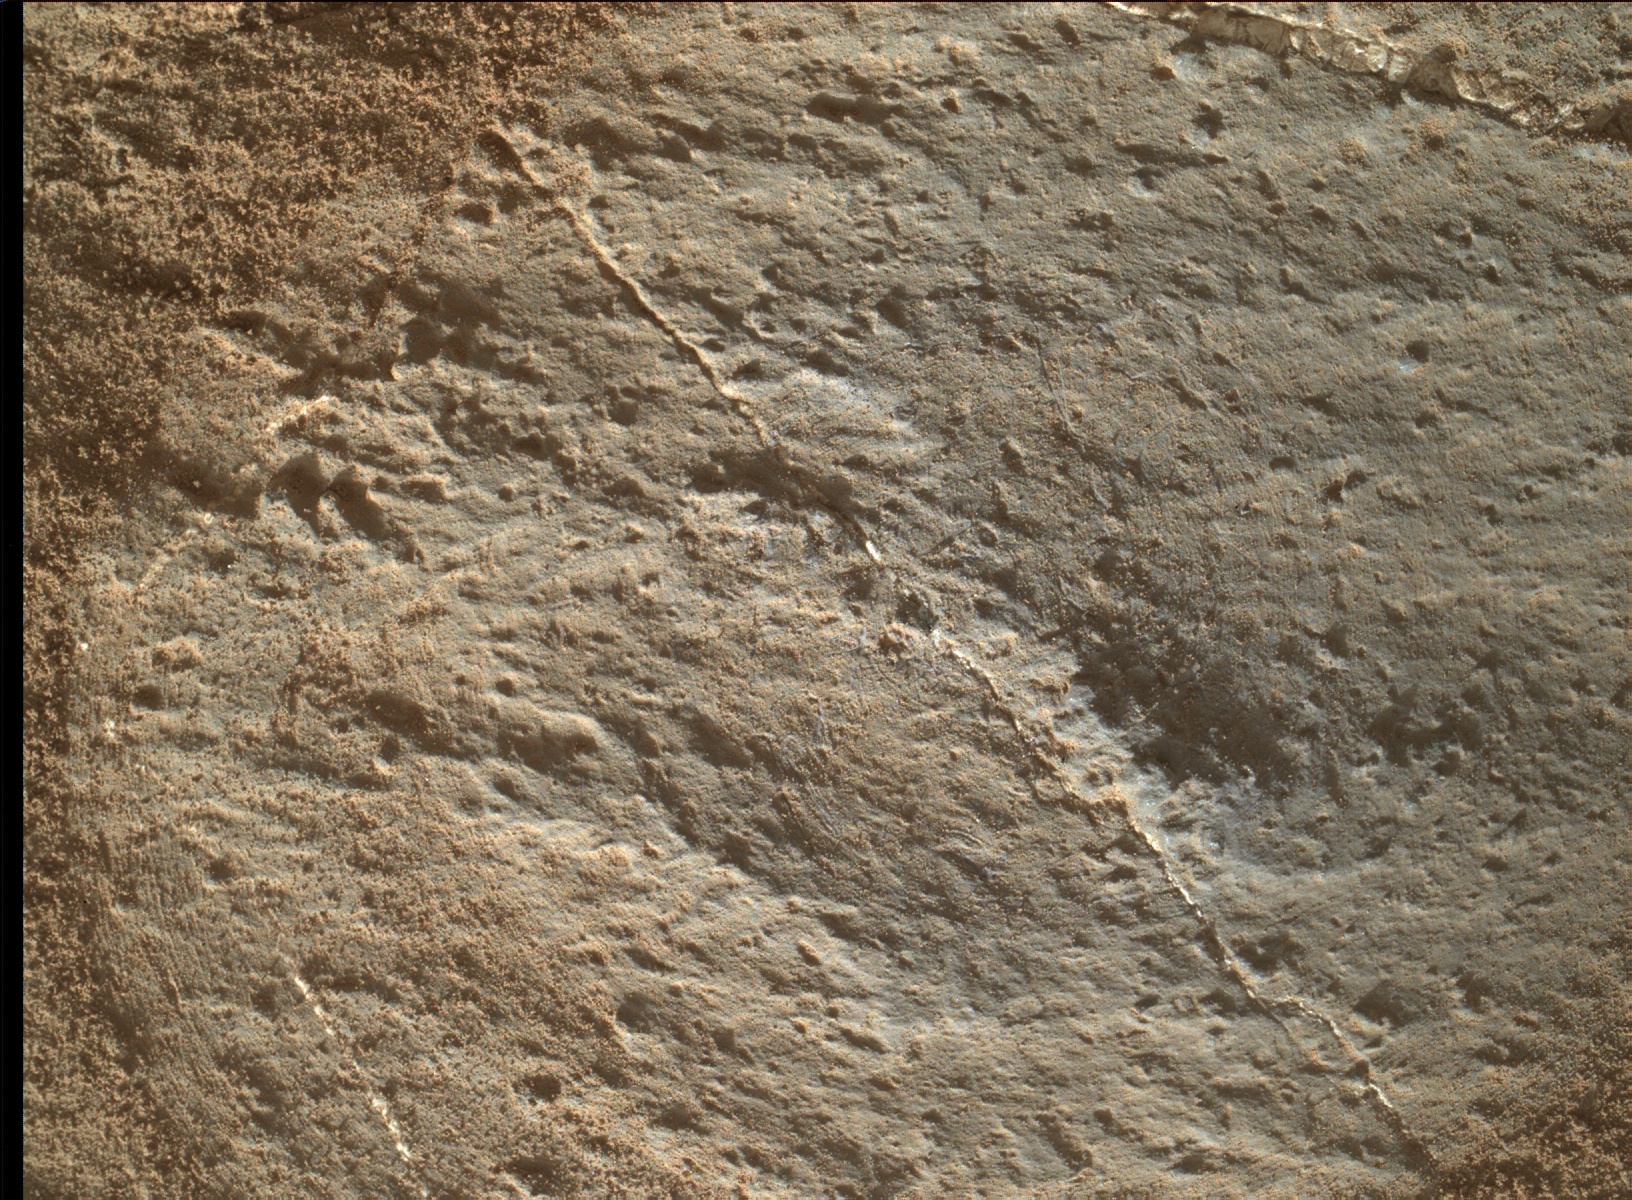 Nasa's Mars rover Curiosity acquired this image using its Mars Hand Lens Imager (MAHLI) on Sol 1259